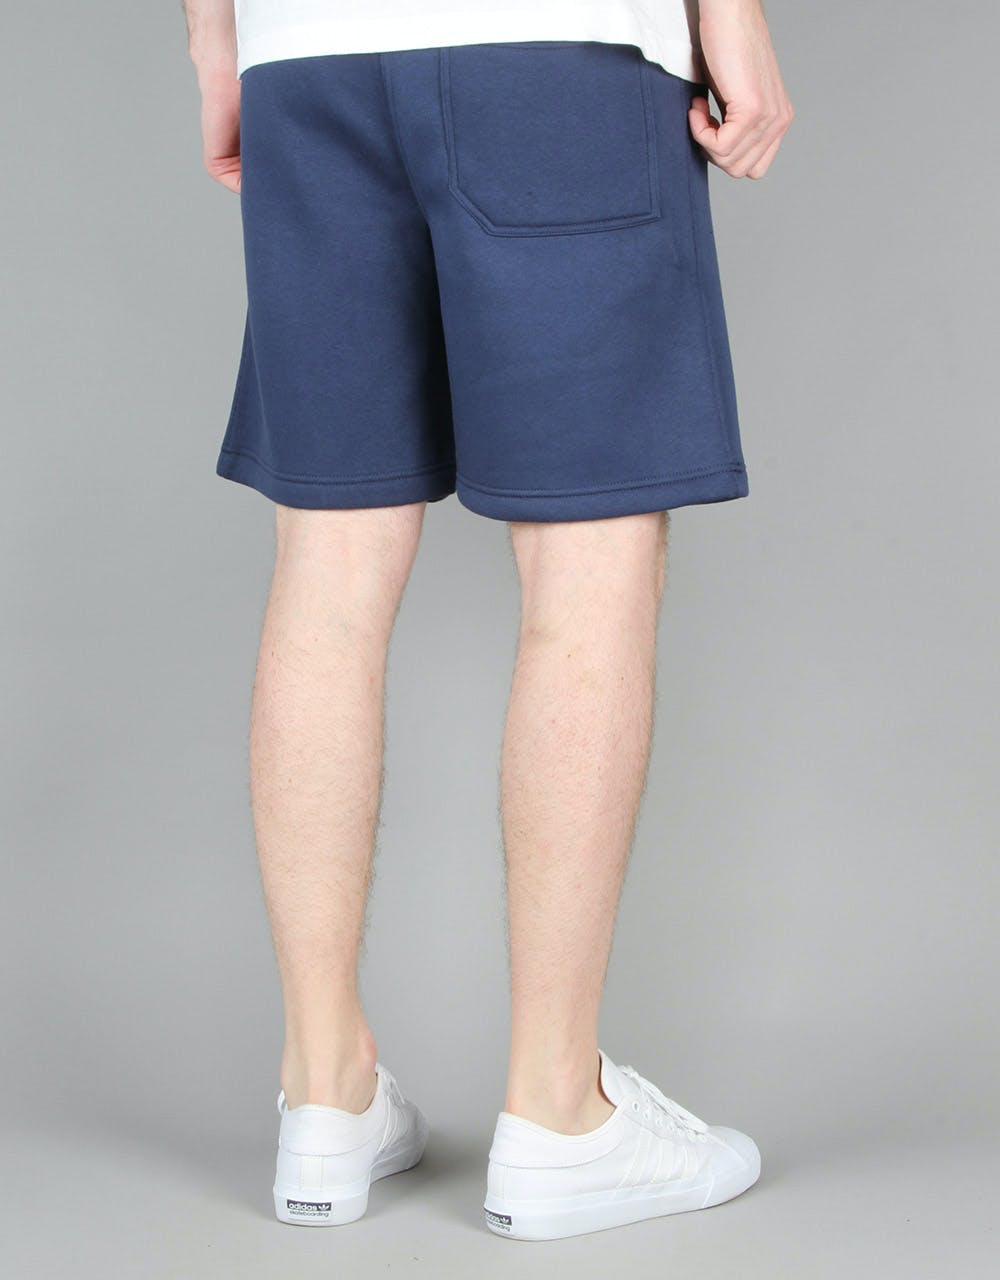 Route One Sweat Shorts - Navy